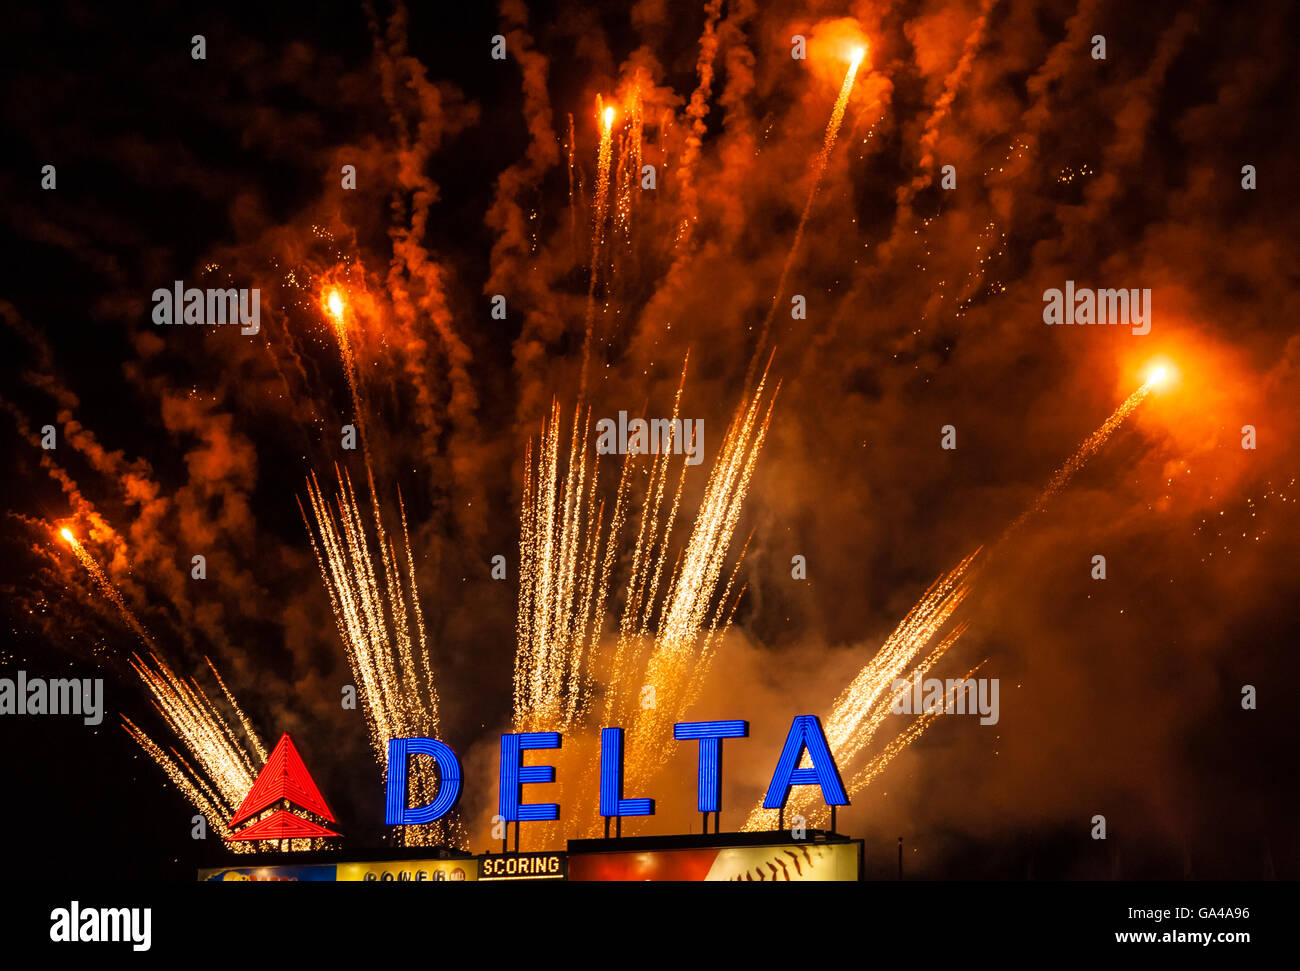 Friday night fireworks above the Delta Air Lines sign at Turner Field in Atlanta Georgia after an Atlanta Braves baseball game. Stock Photo